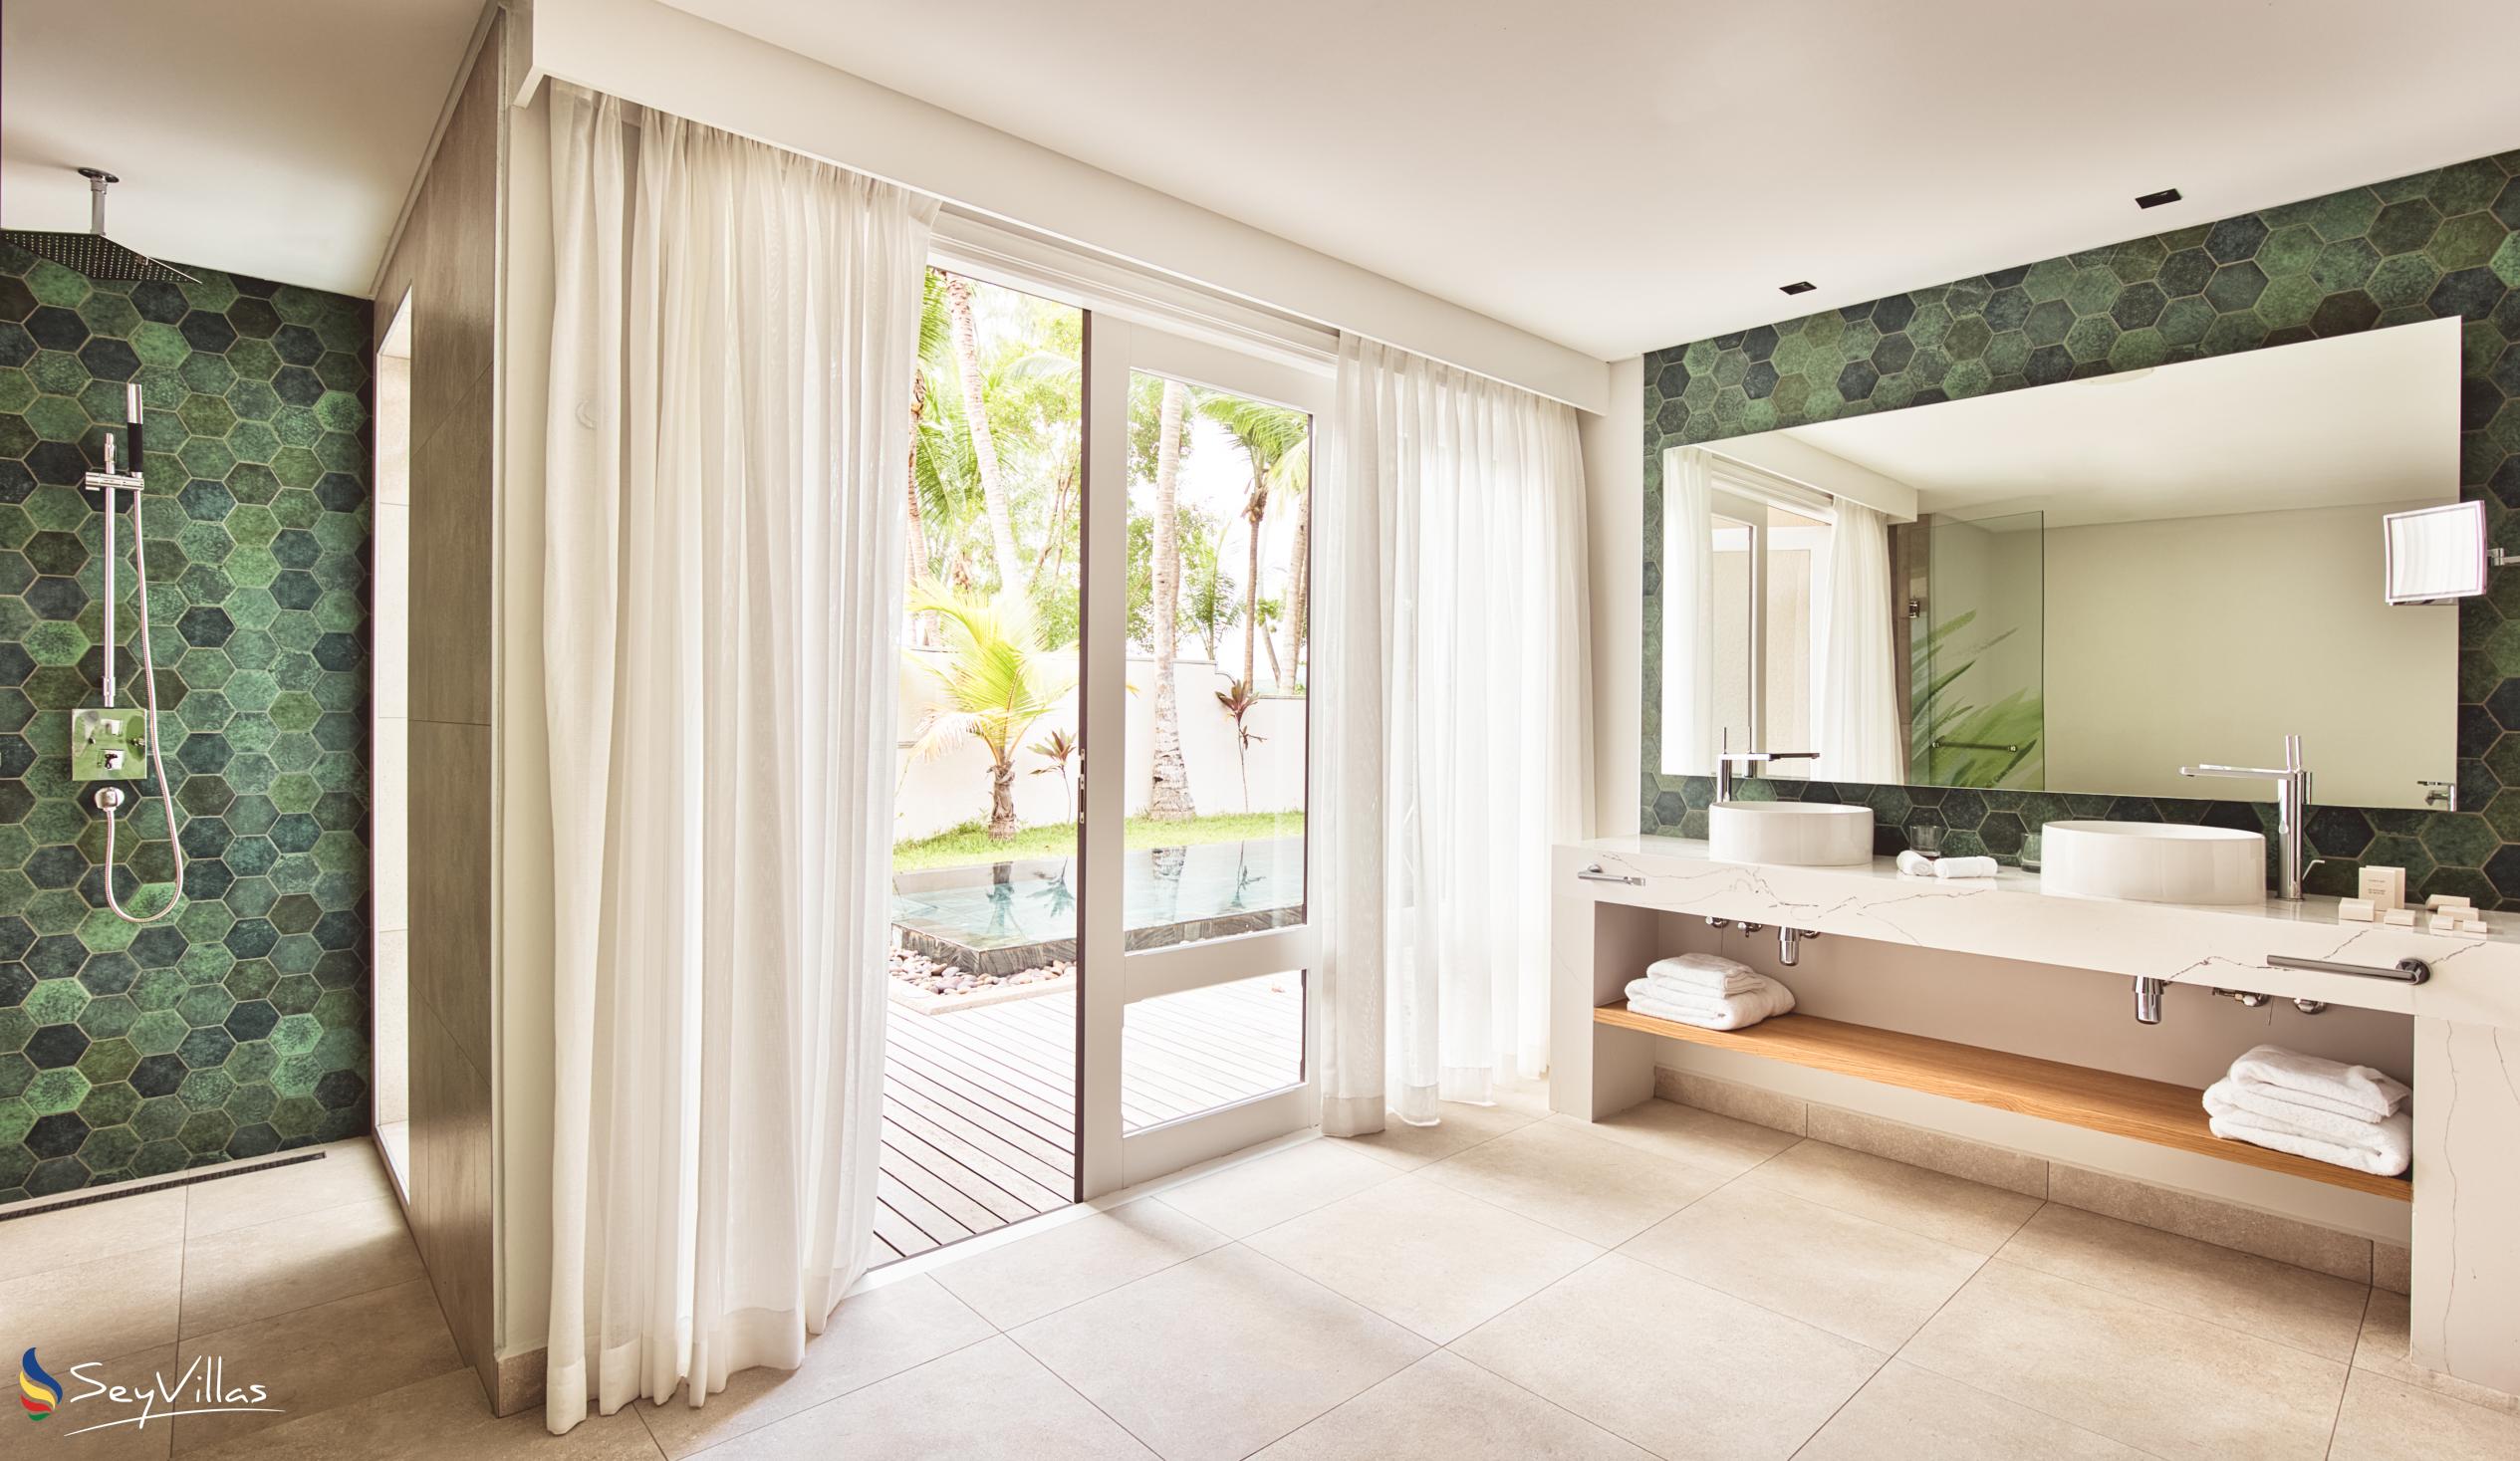 Photo 102: Club Med Seychelles - Family Suite with Private Pool - Saint Anne (Seychelles)